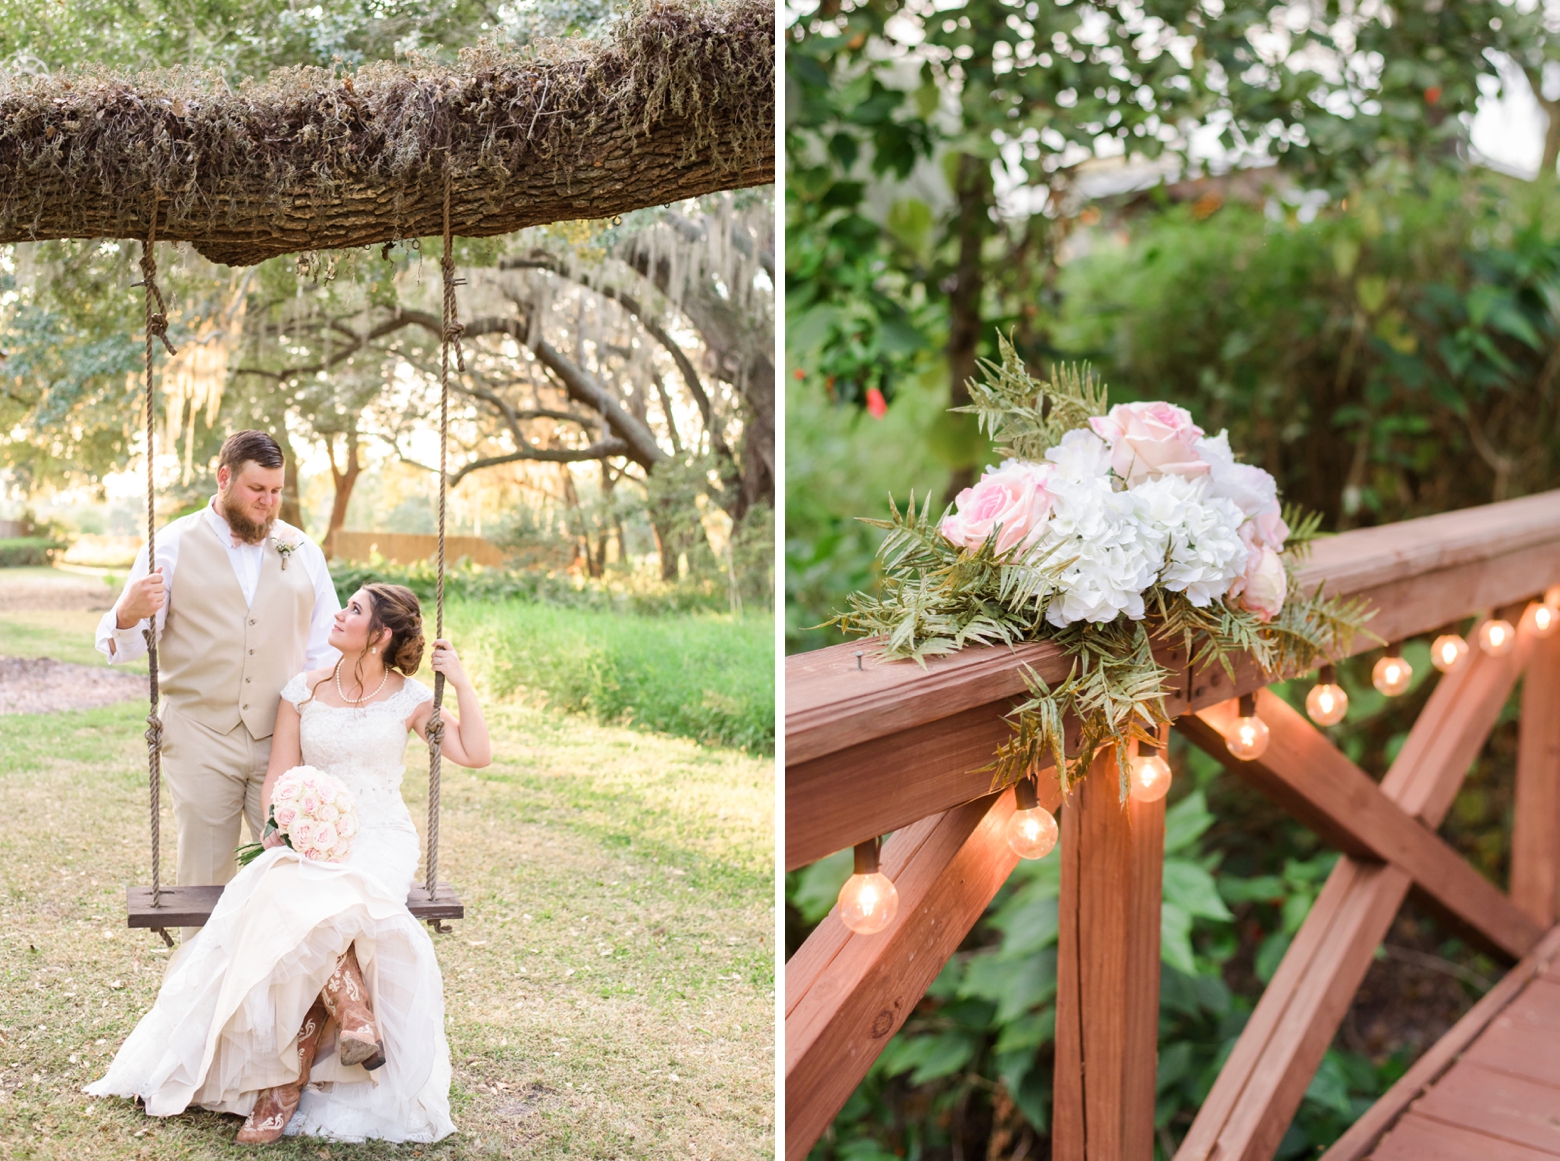 Bride and Groom on a swing under an old oak tree and florals along the bridge railing